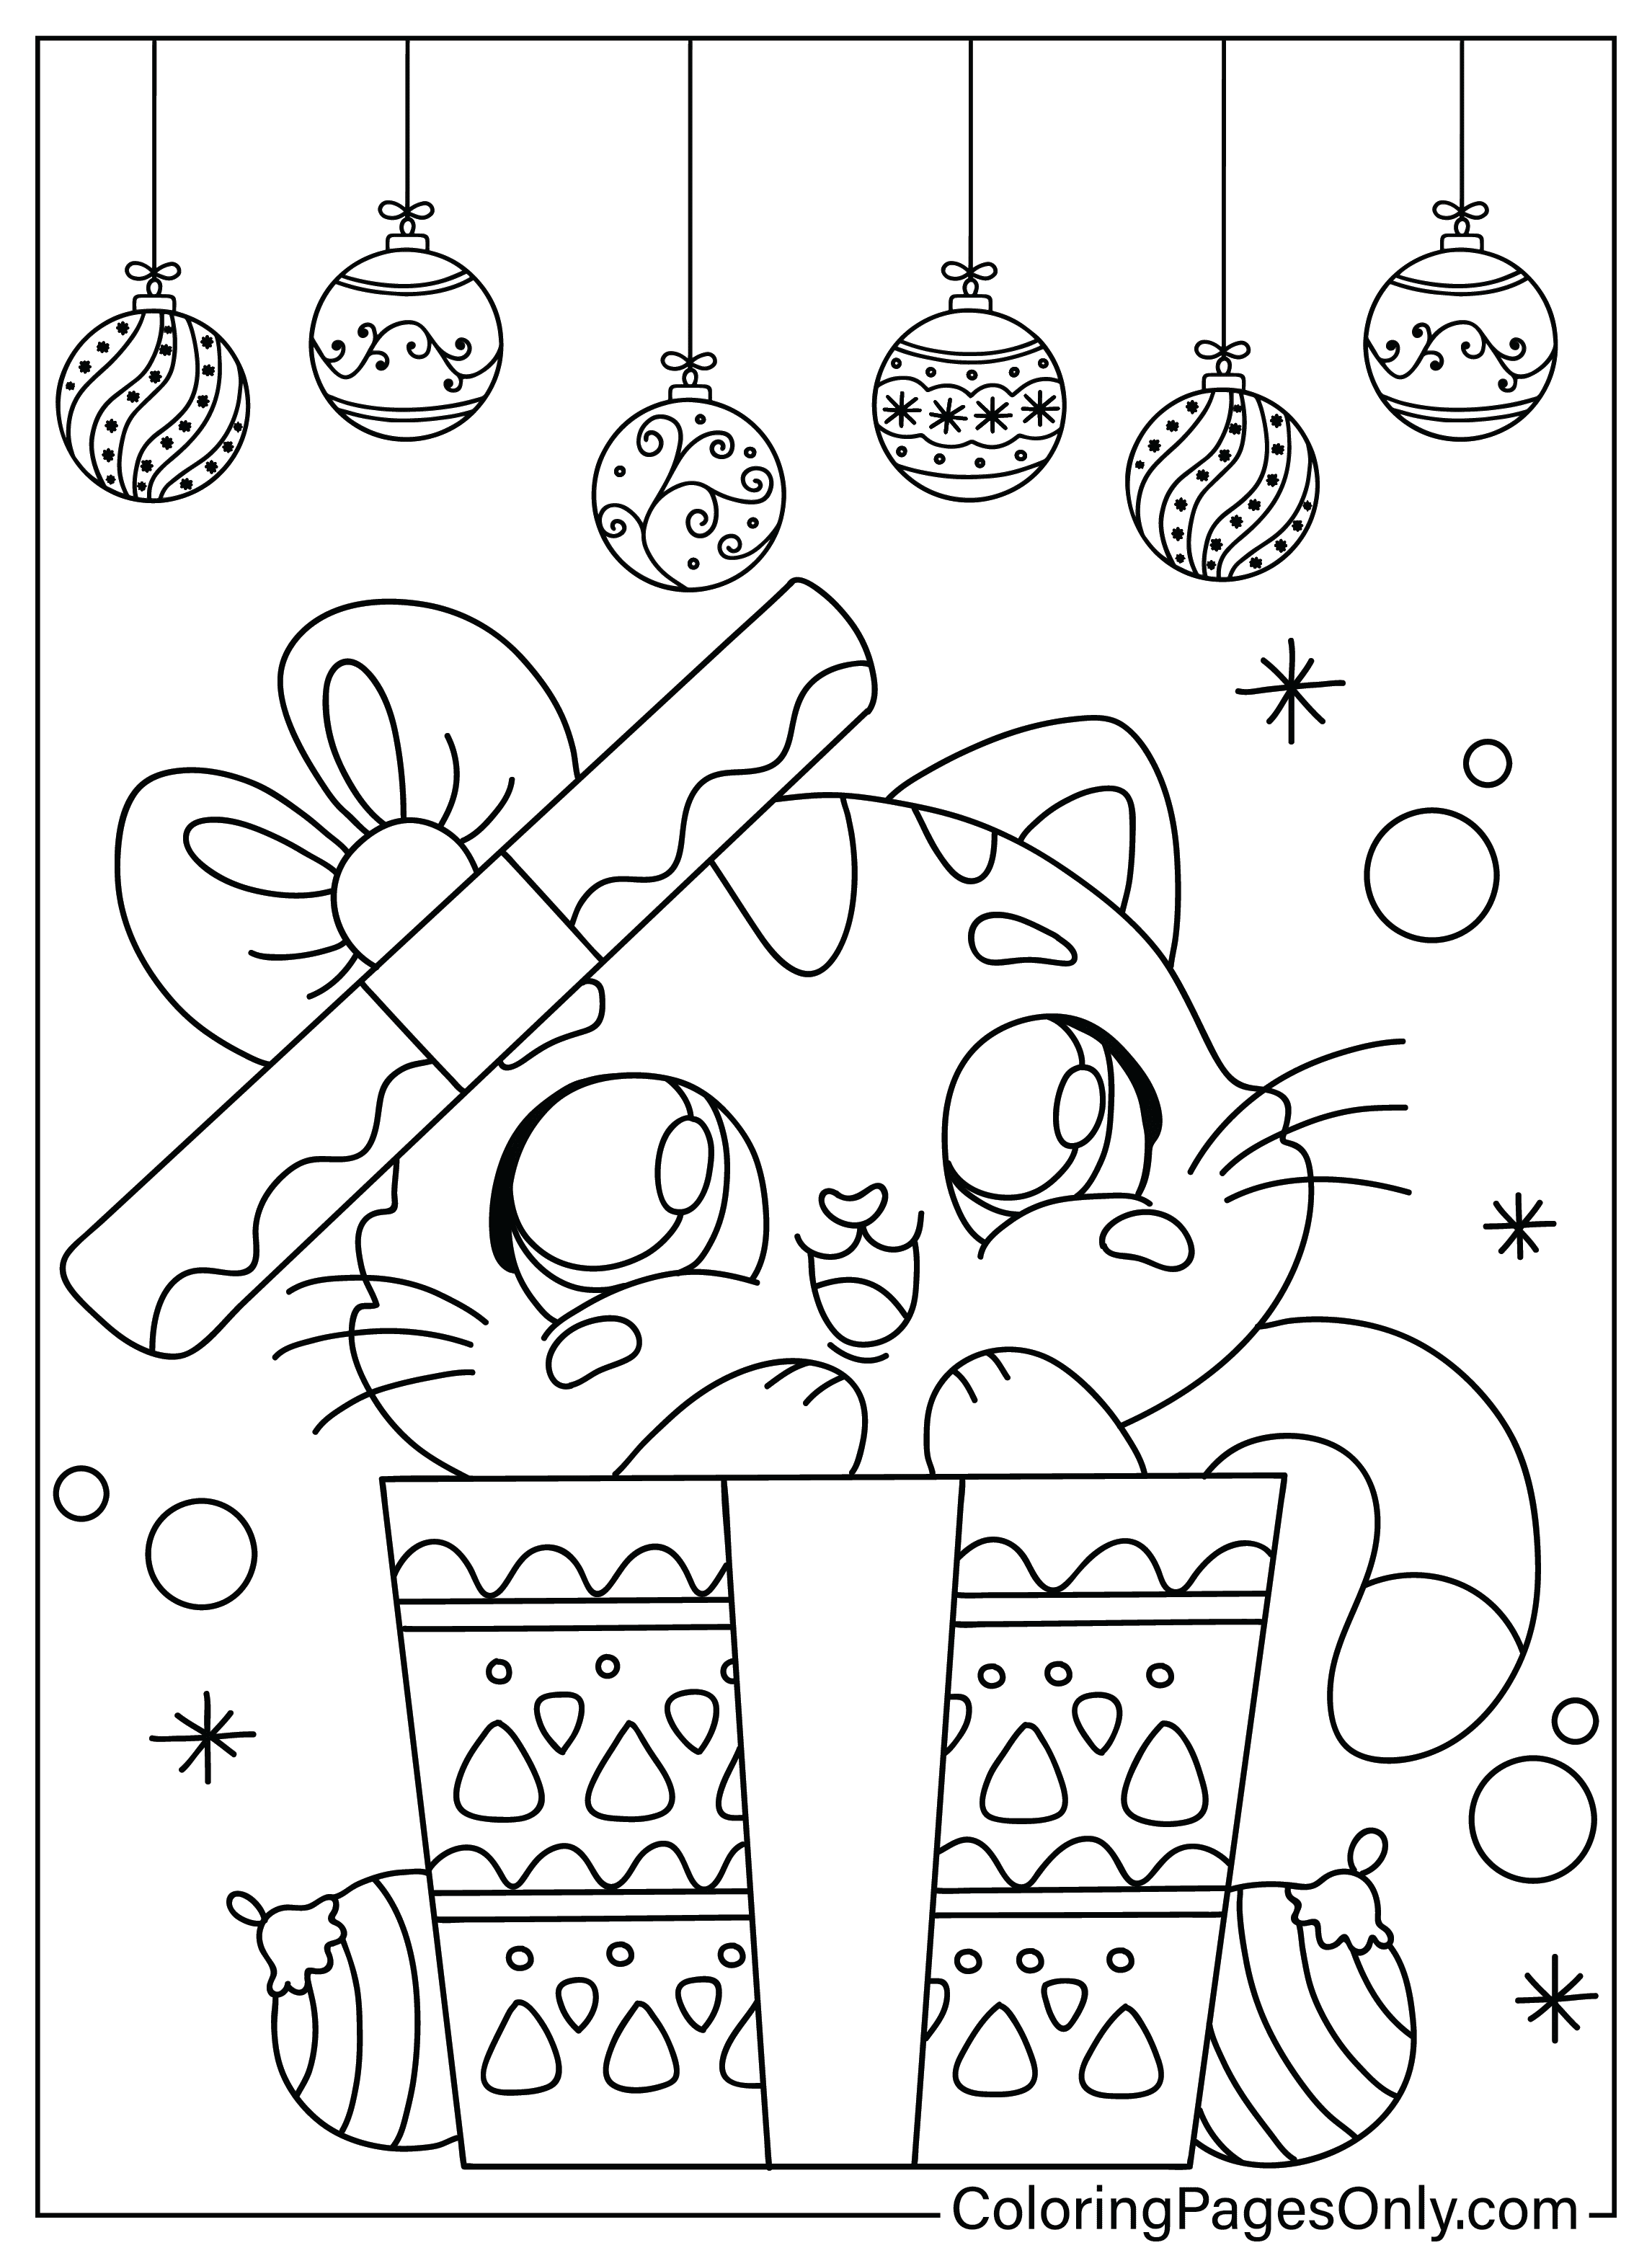 Cat Cute Christmas Coloring Page